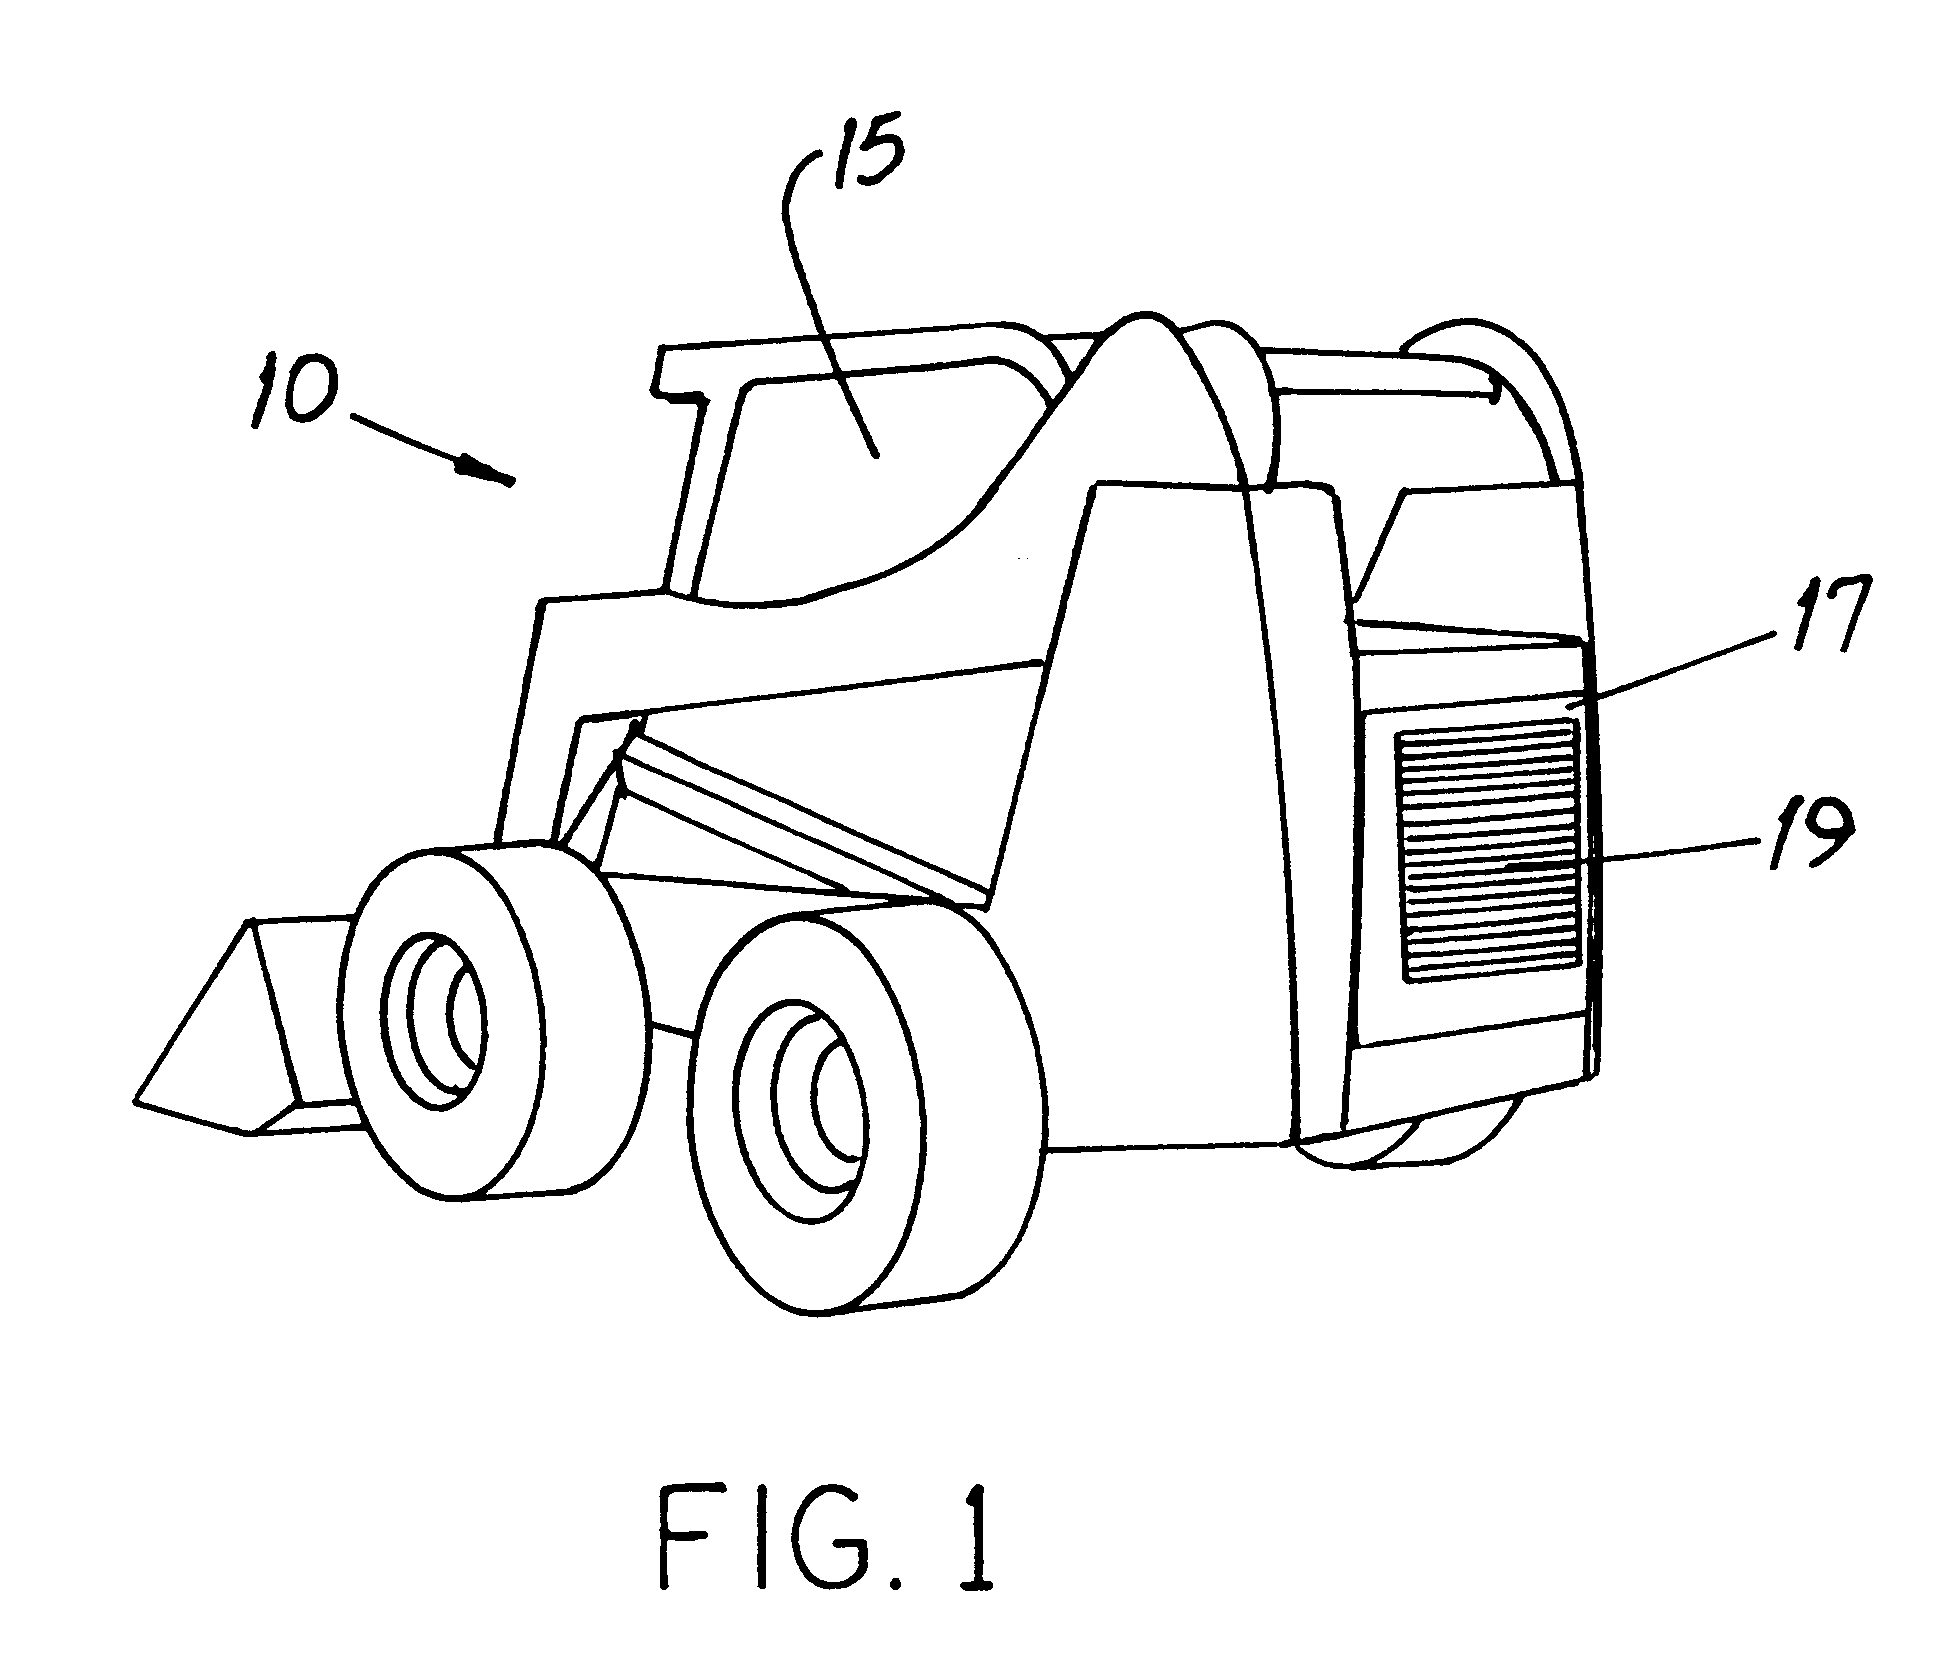 Cooling system for an off-highway vehicle